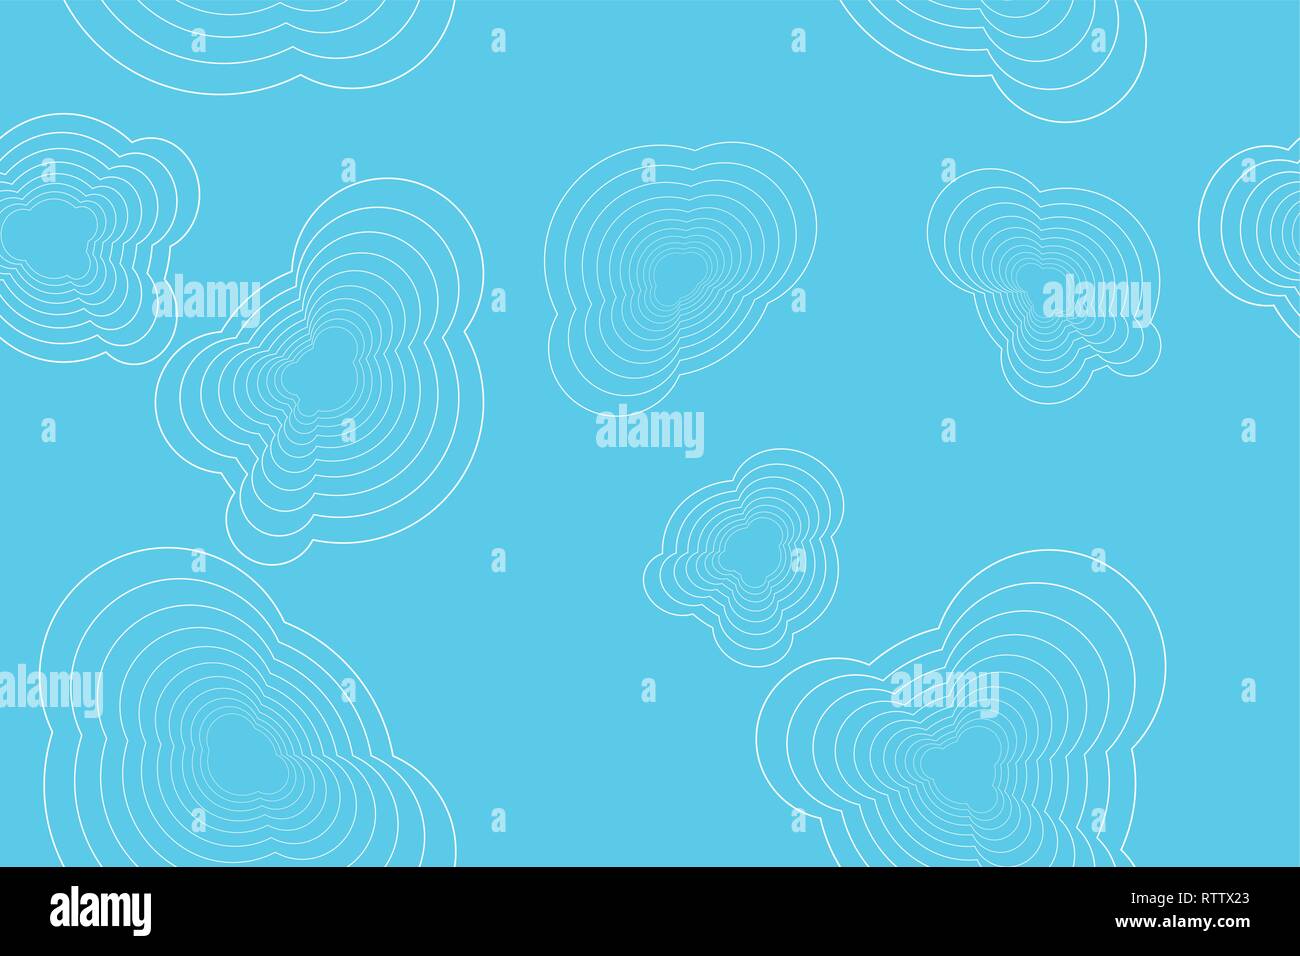 Seamless, abstract background pattern made with organic shaped repeated lines in clouds abstraction. Cute, playful vector art in blue color. Stock Vector